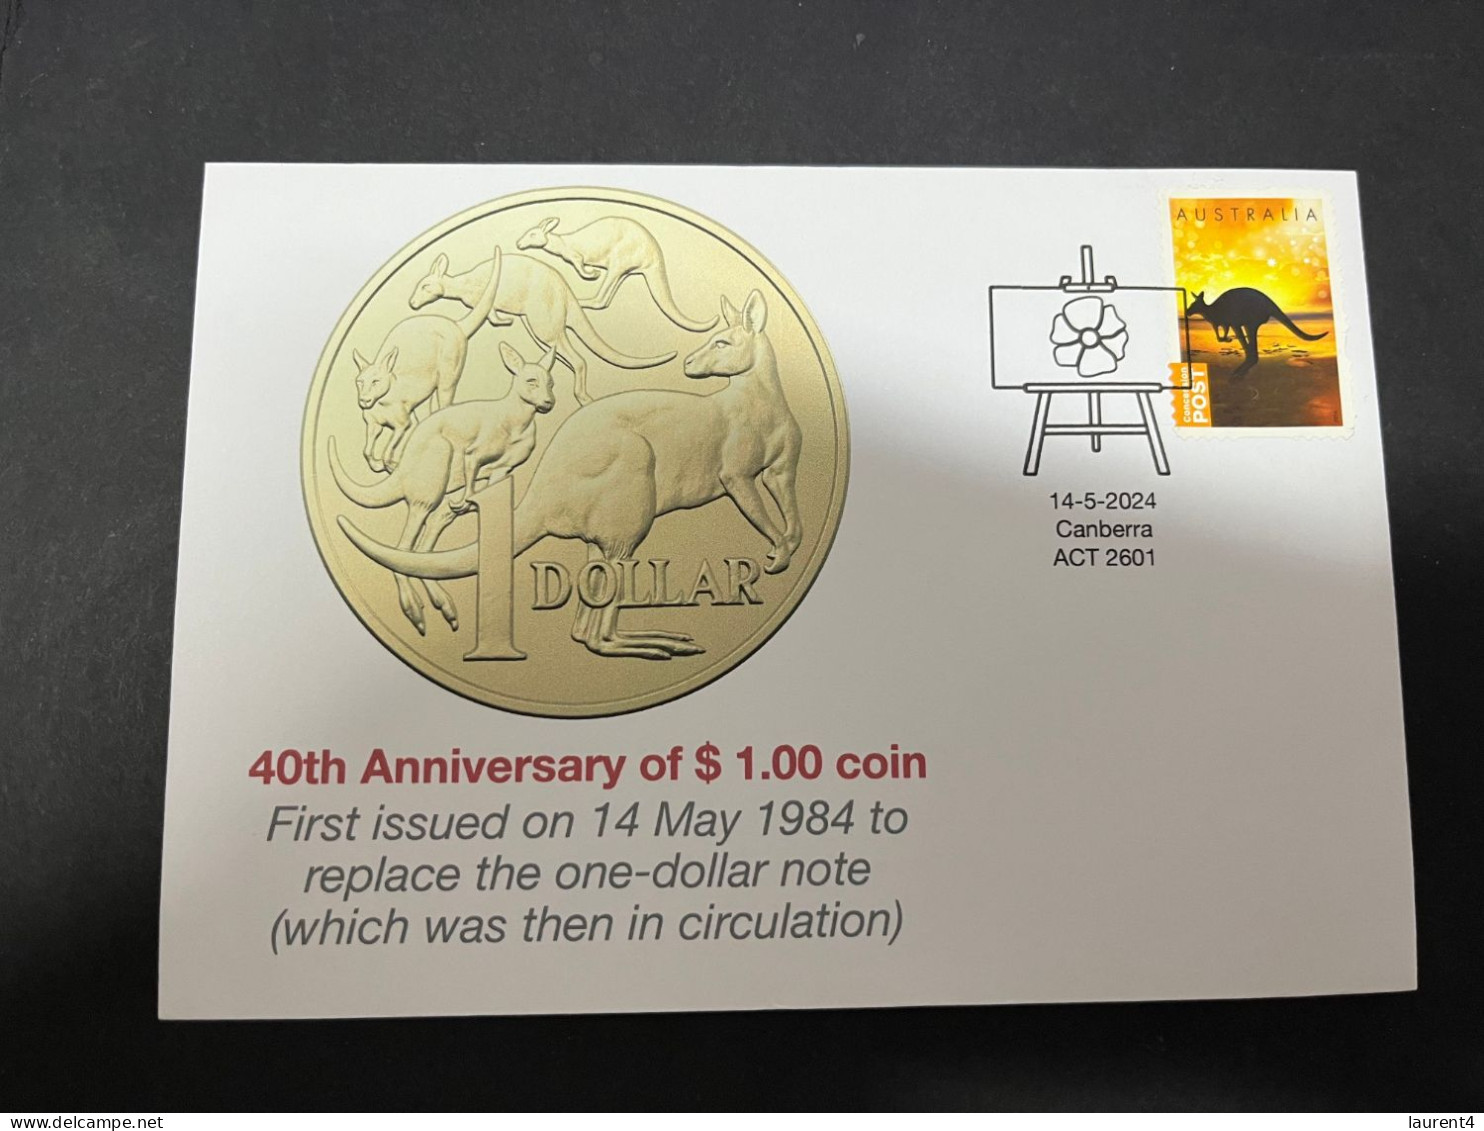 15-5-2024 (5 Z 12) Australia - 40th Anniversary Of The $ 1.00 Coin Released For 1st Time In Australia On 14-5-1984 - Münzen